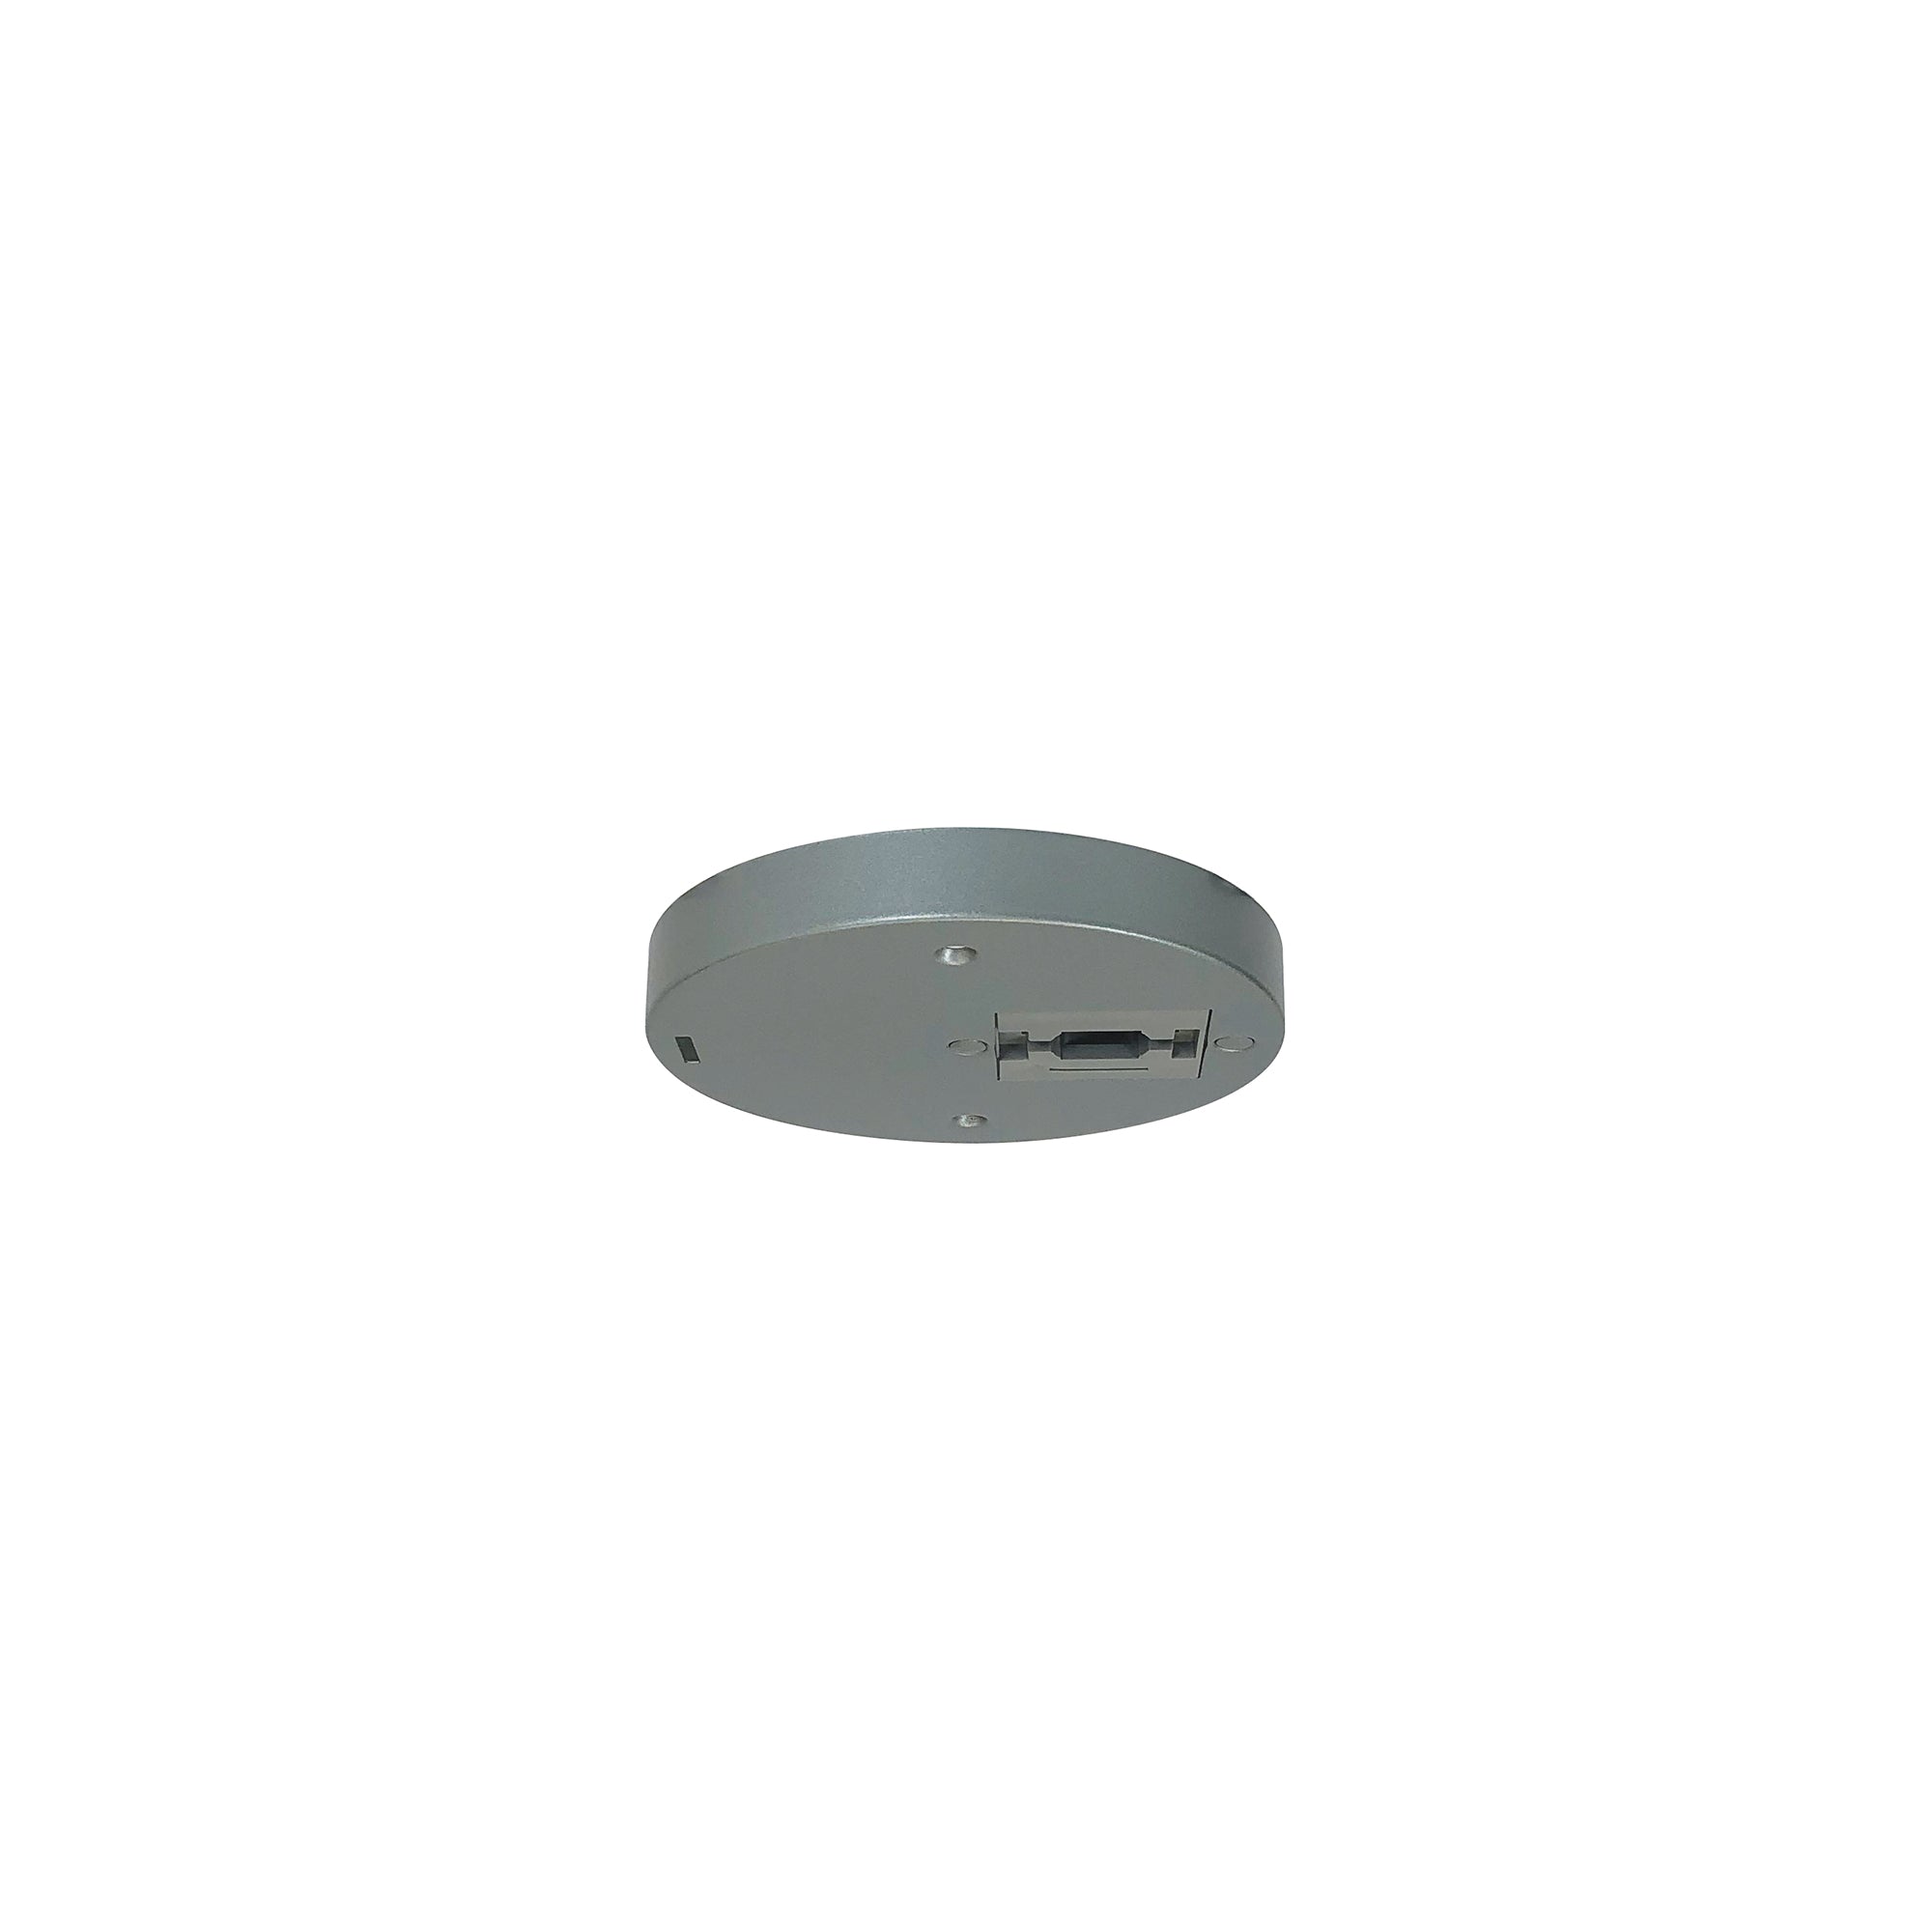 Nora Lighting NT-379S - Track - Round Monopoint Canopy for Aiden Track Head (NTE-850), Silver